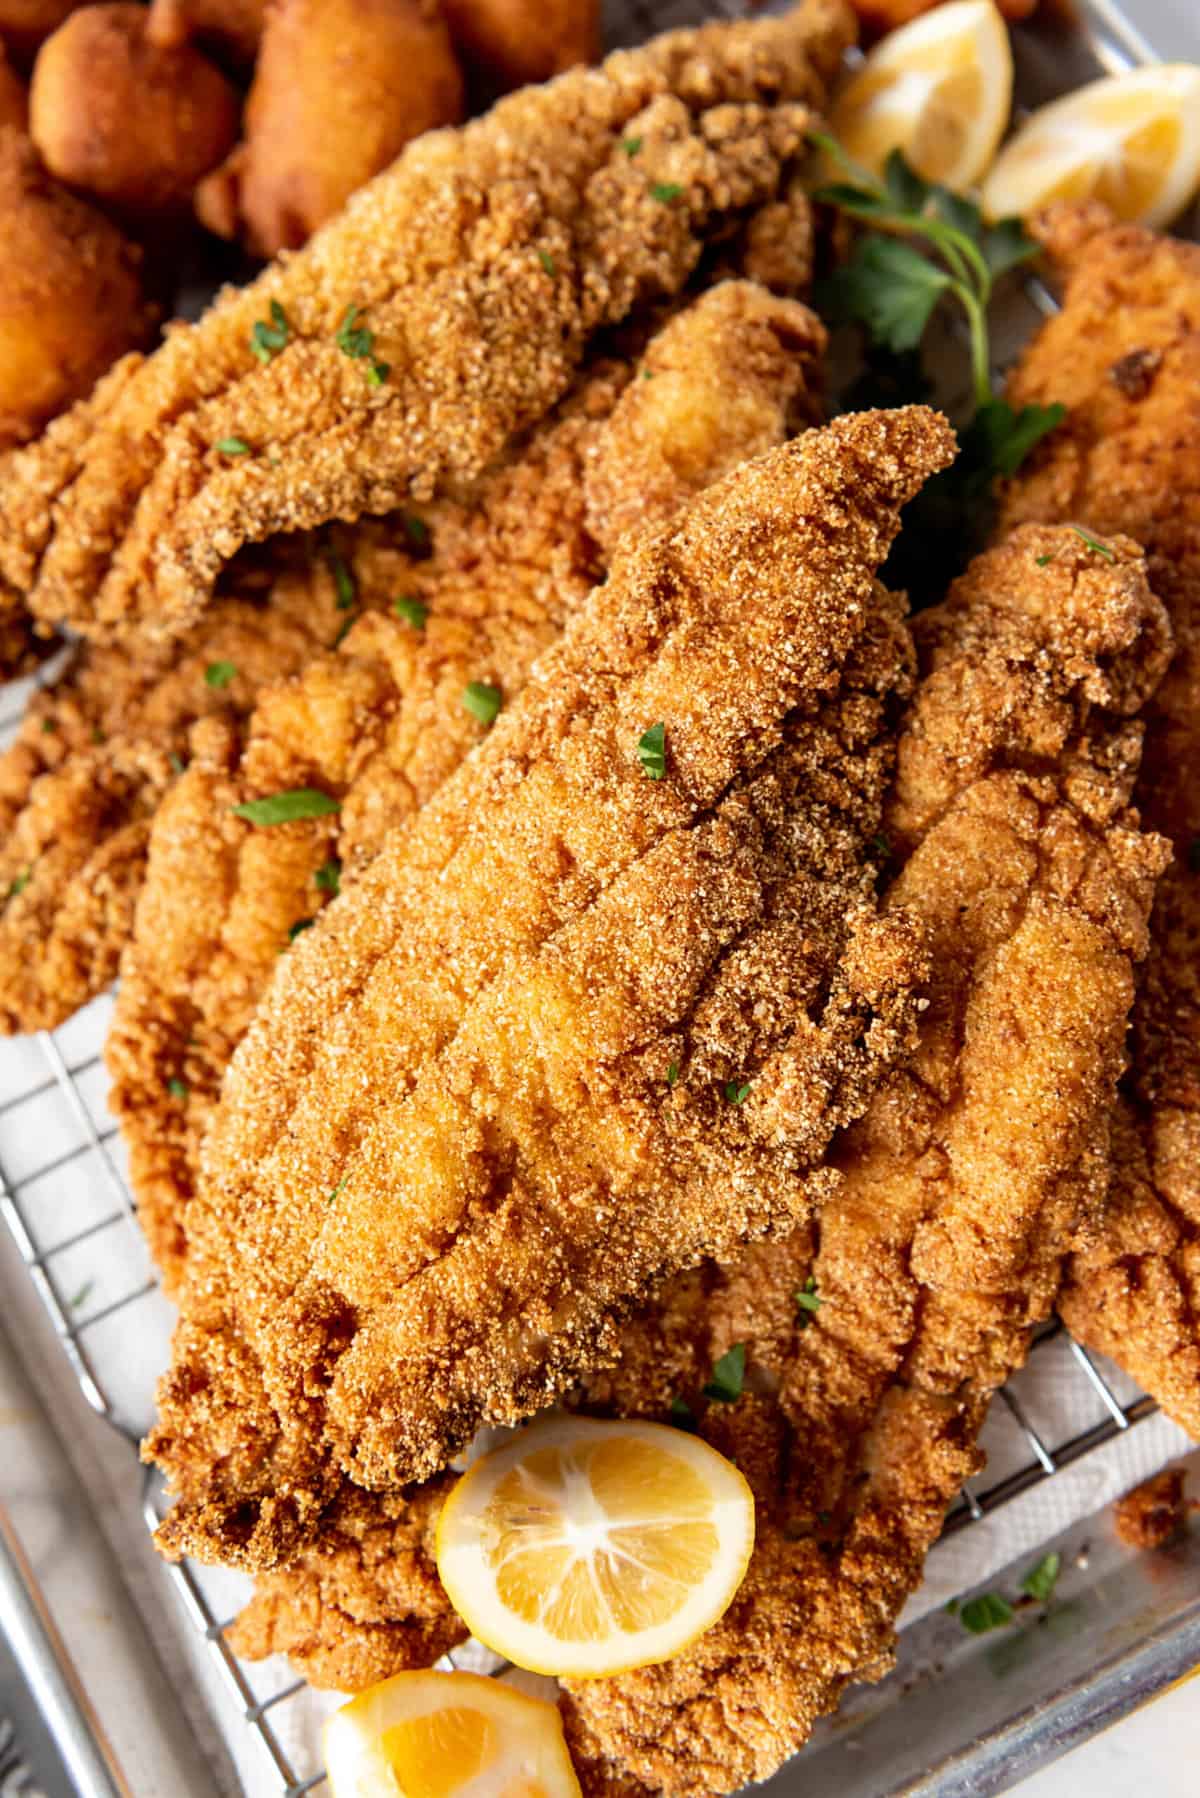 A close image of pieces of fried catfish with cornmeal coating.